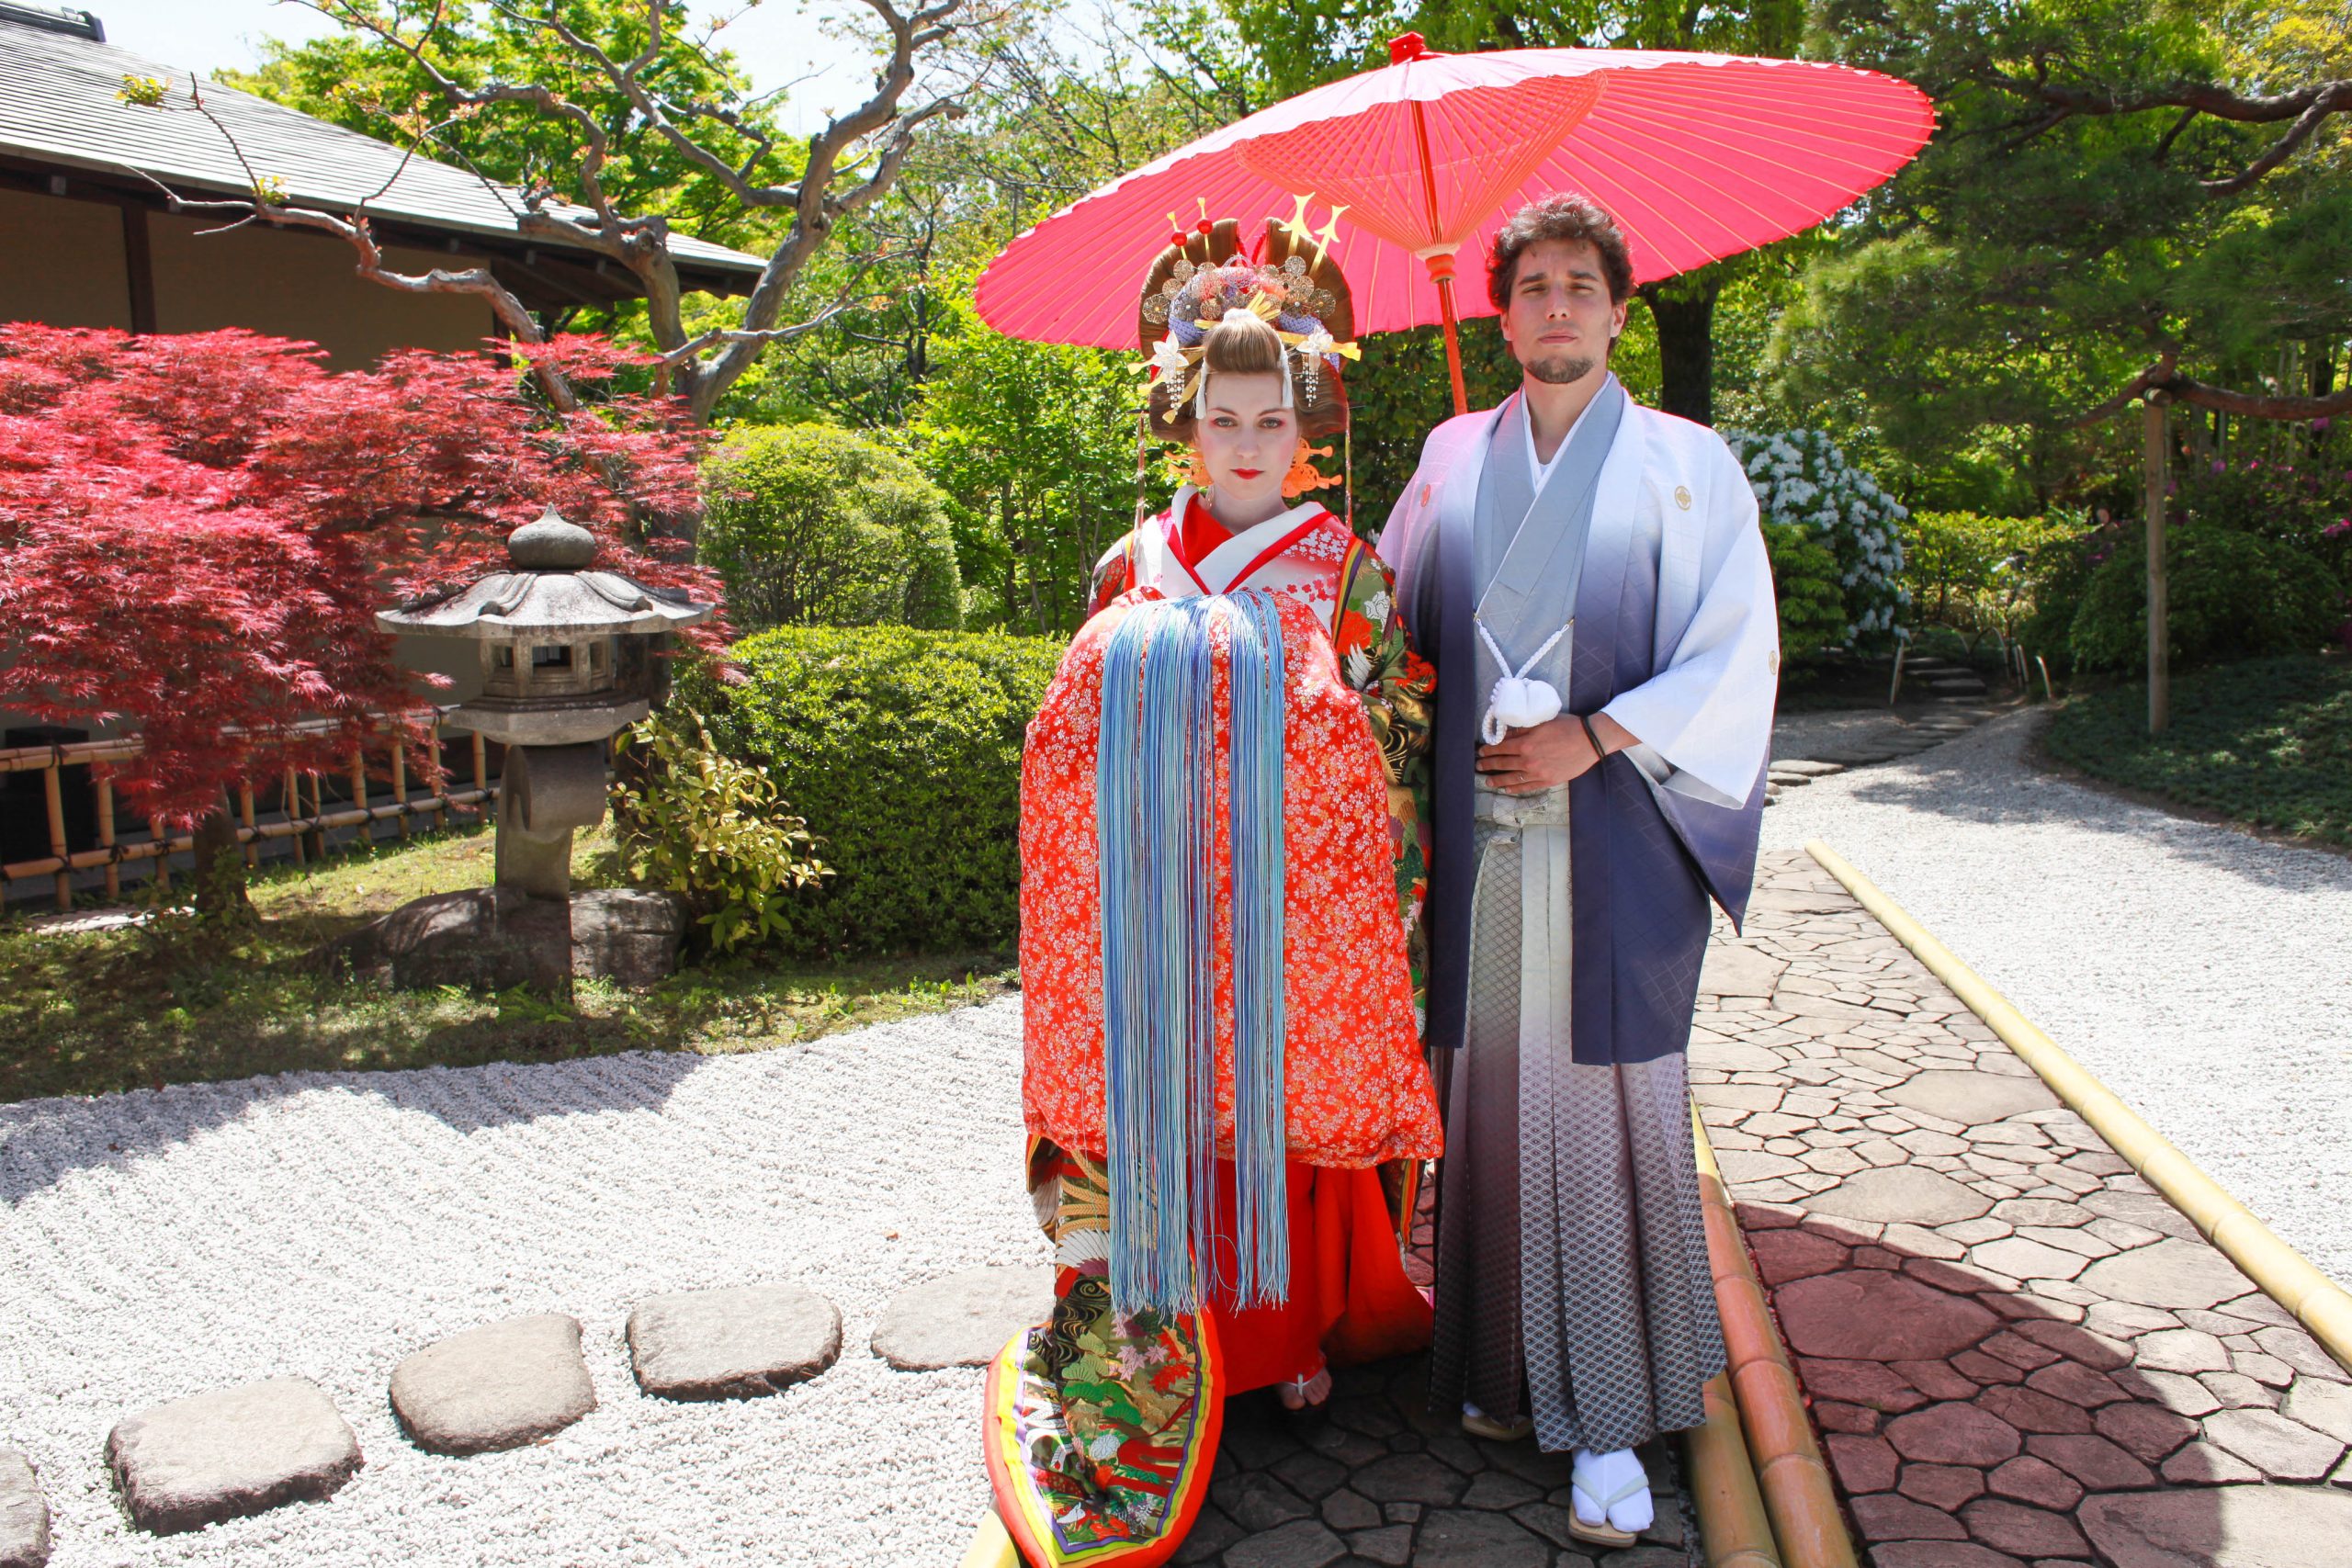 Wearing a traditional Japanese Kimono – You Could Travel